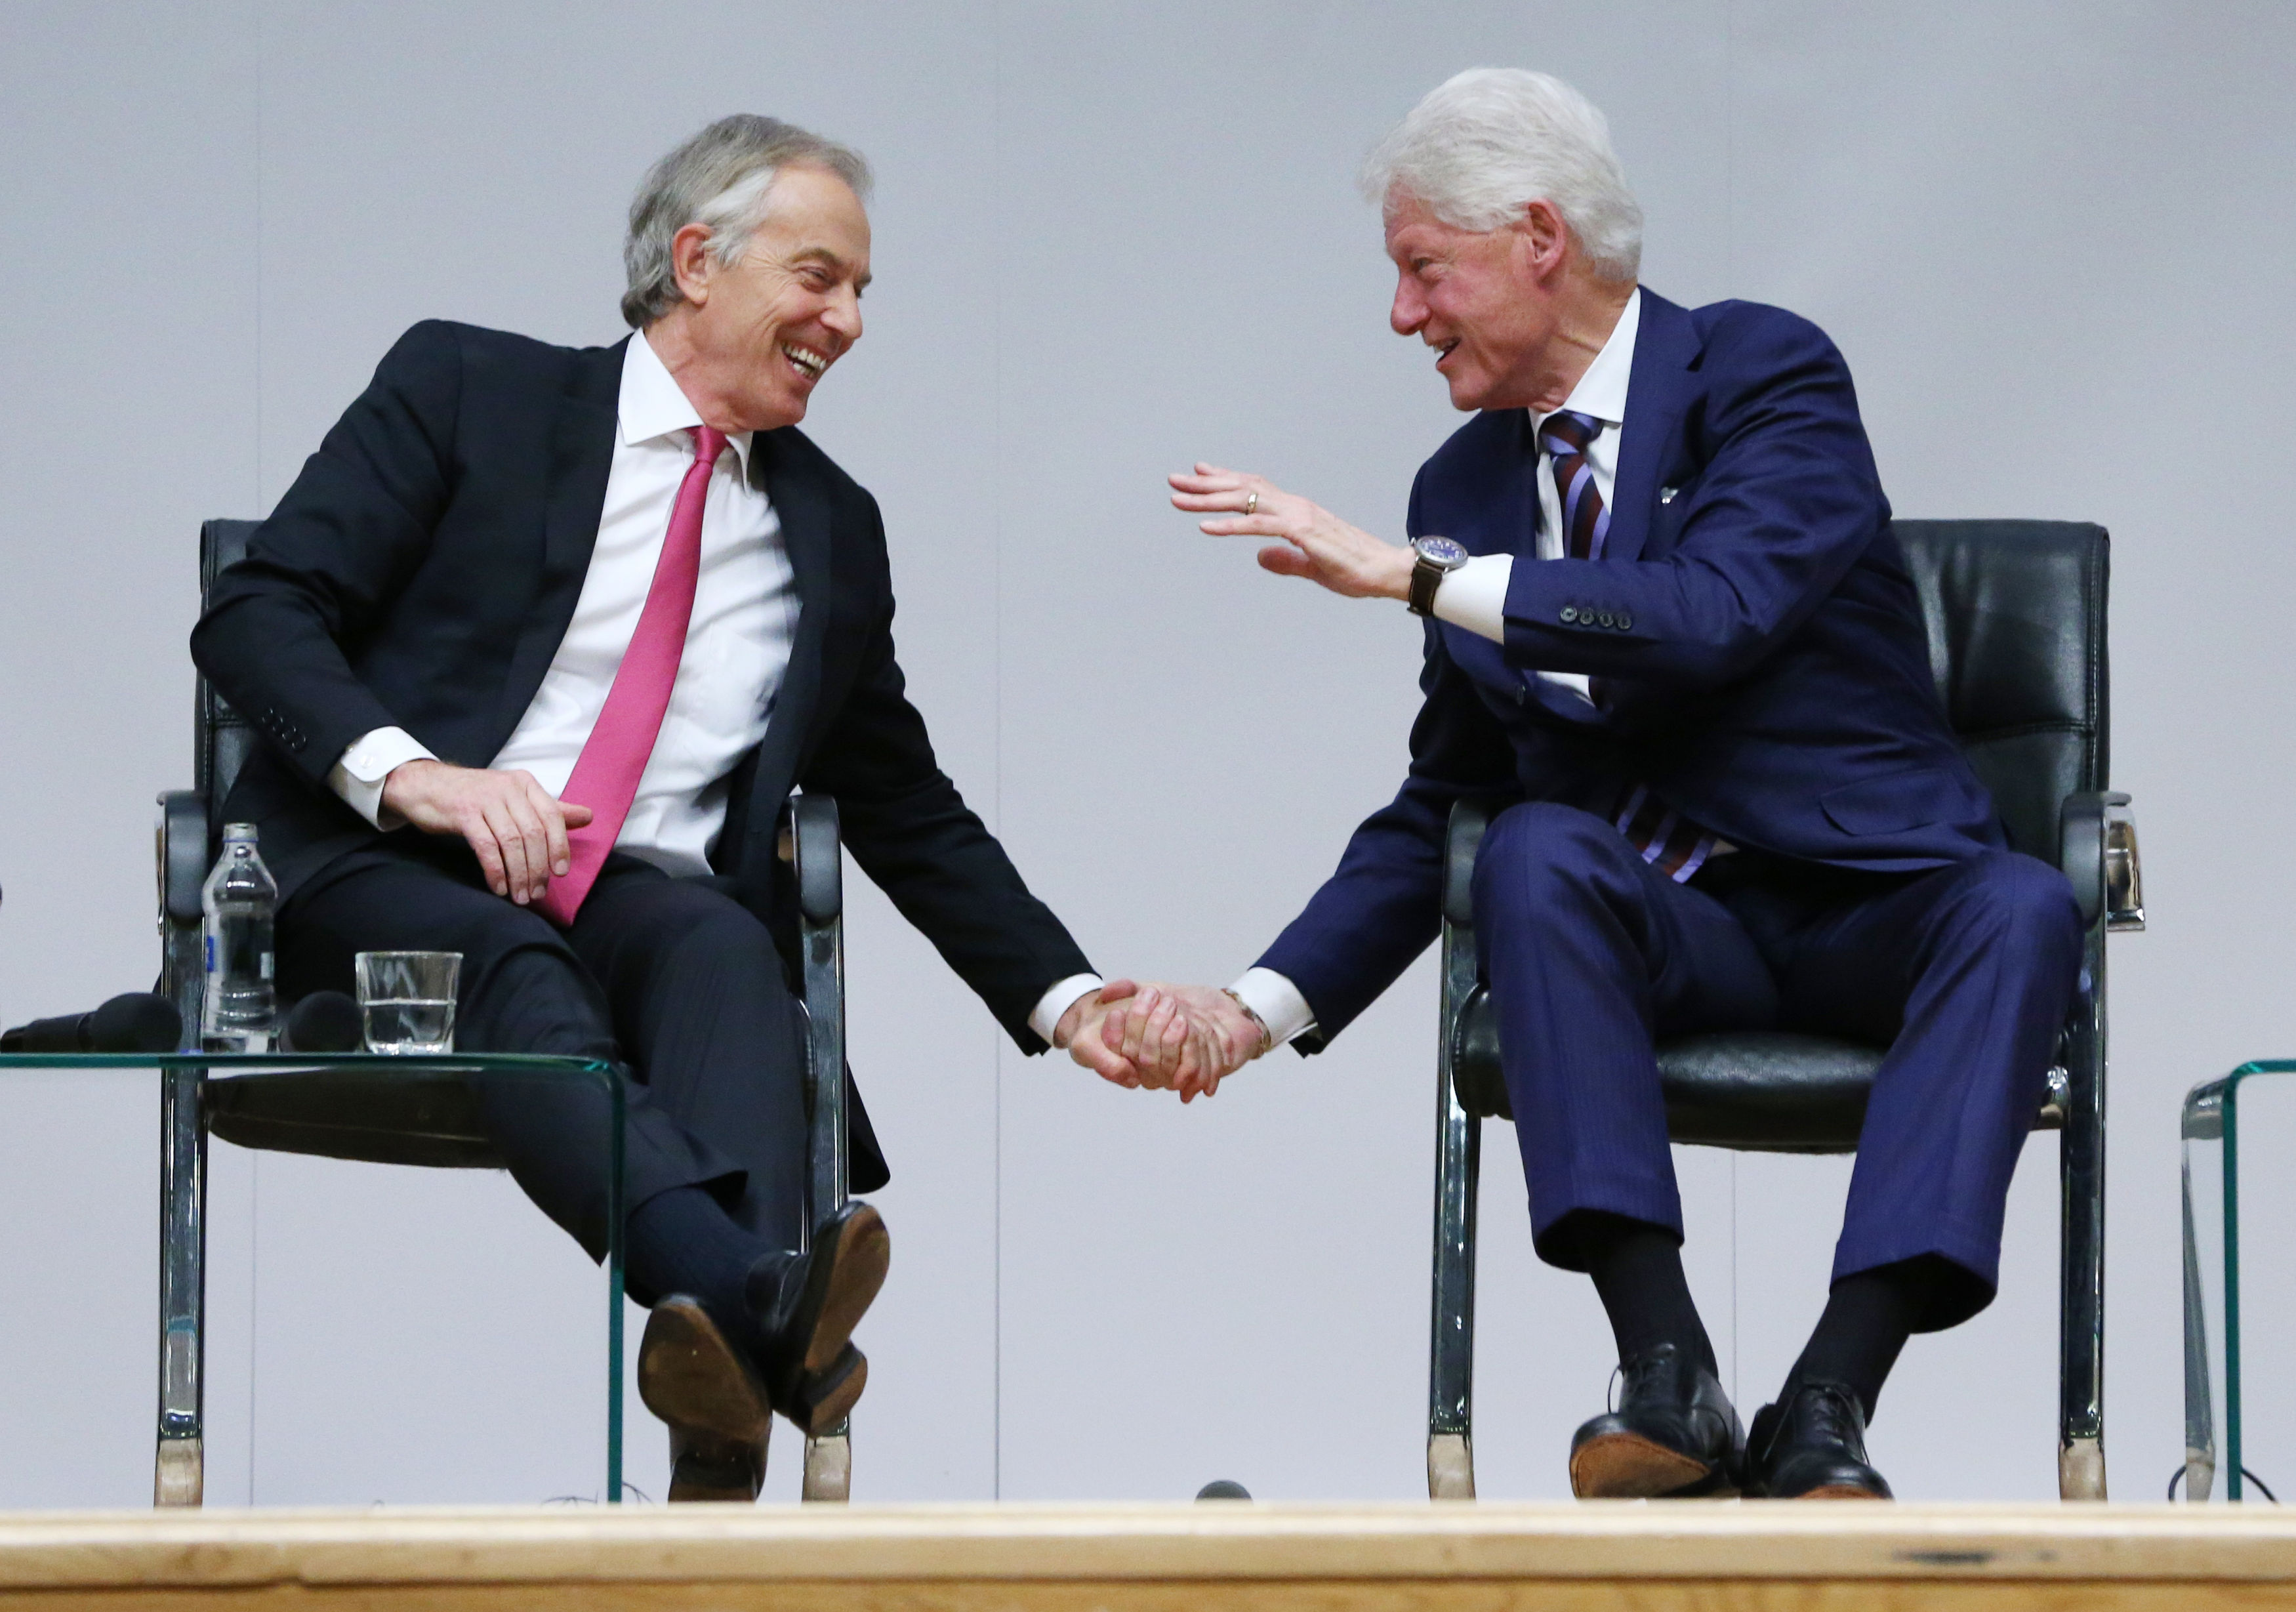 Tony Blair and Bill Clinton played key roles in the Good Friday Agreement (Brian Lawless/PA)